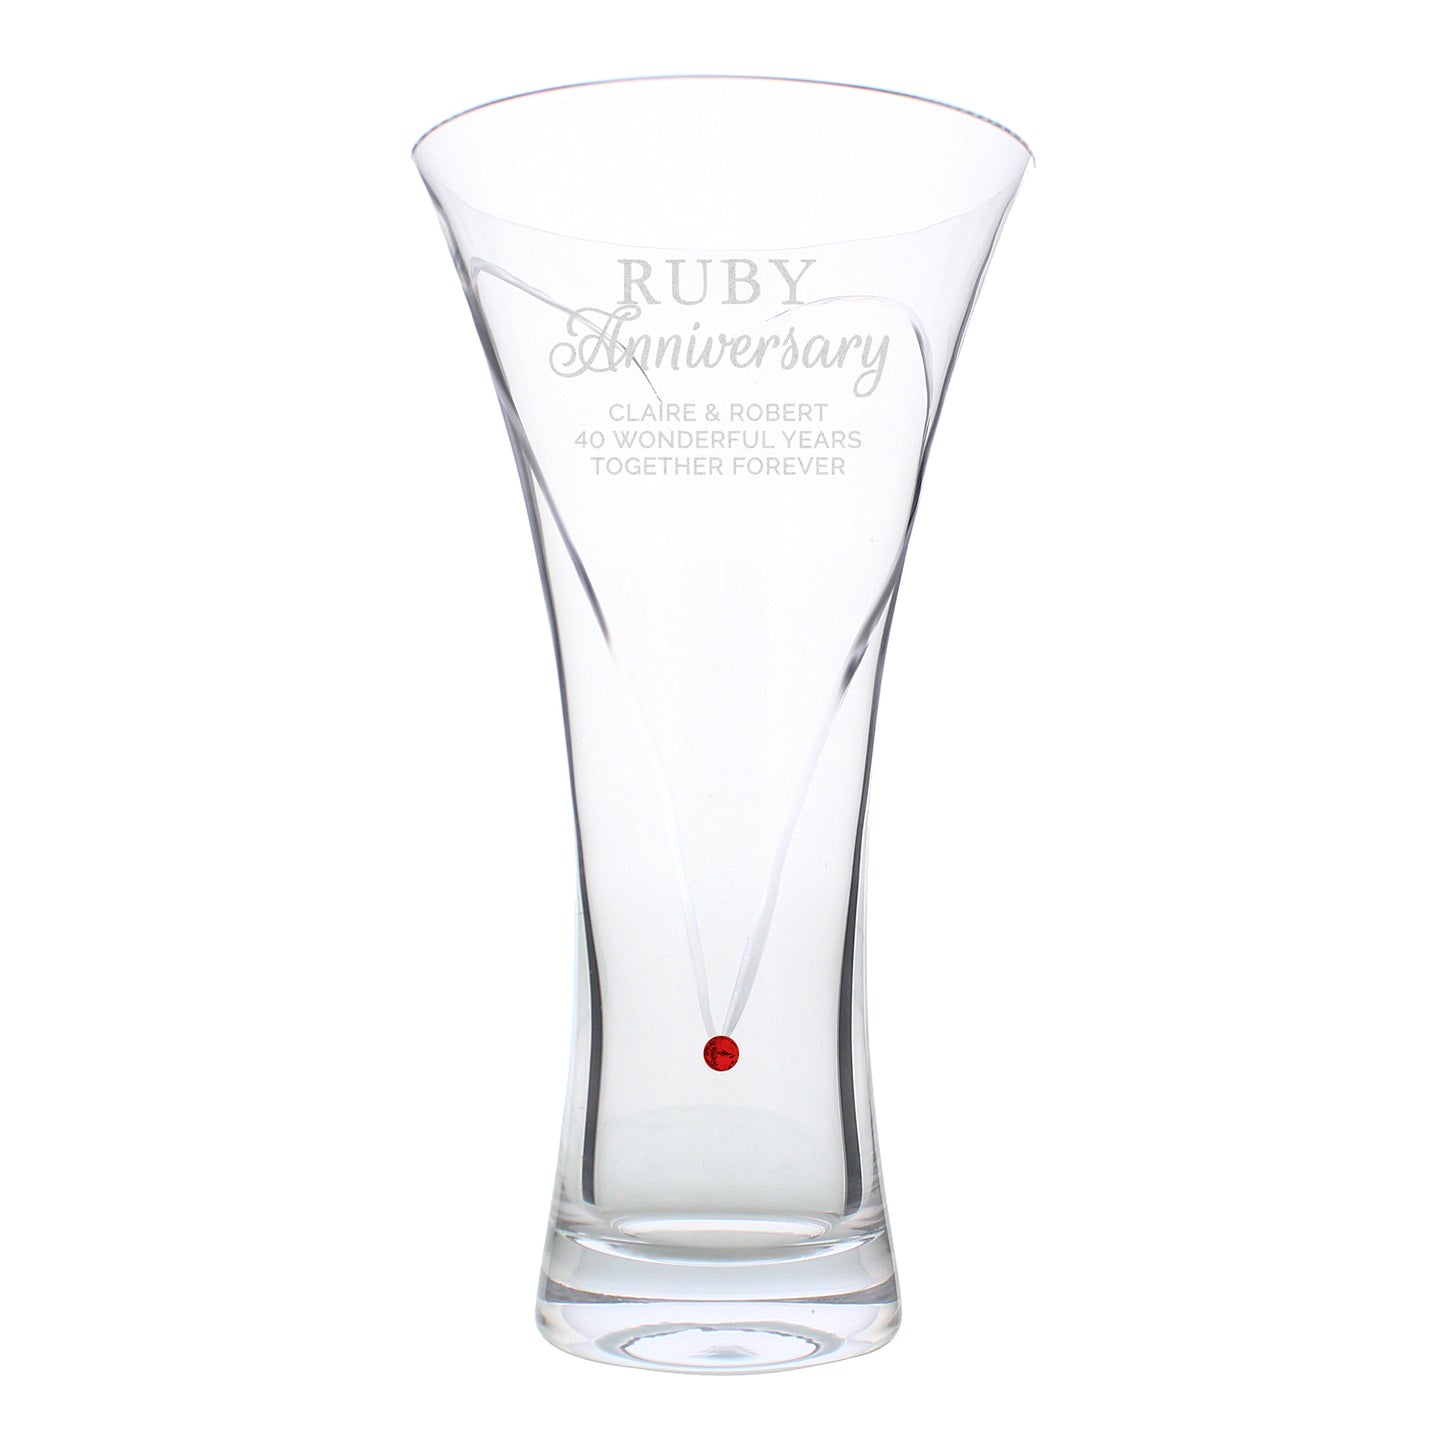 Ruby Anniversary and hand cut diamante vase with Swarovski Elements - Lilybet loves